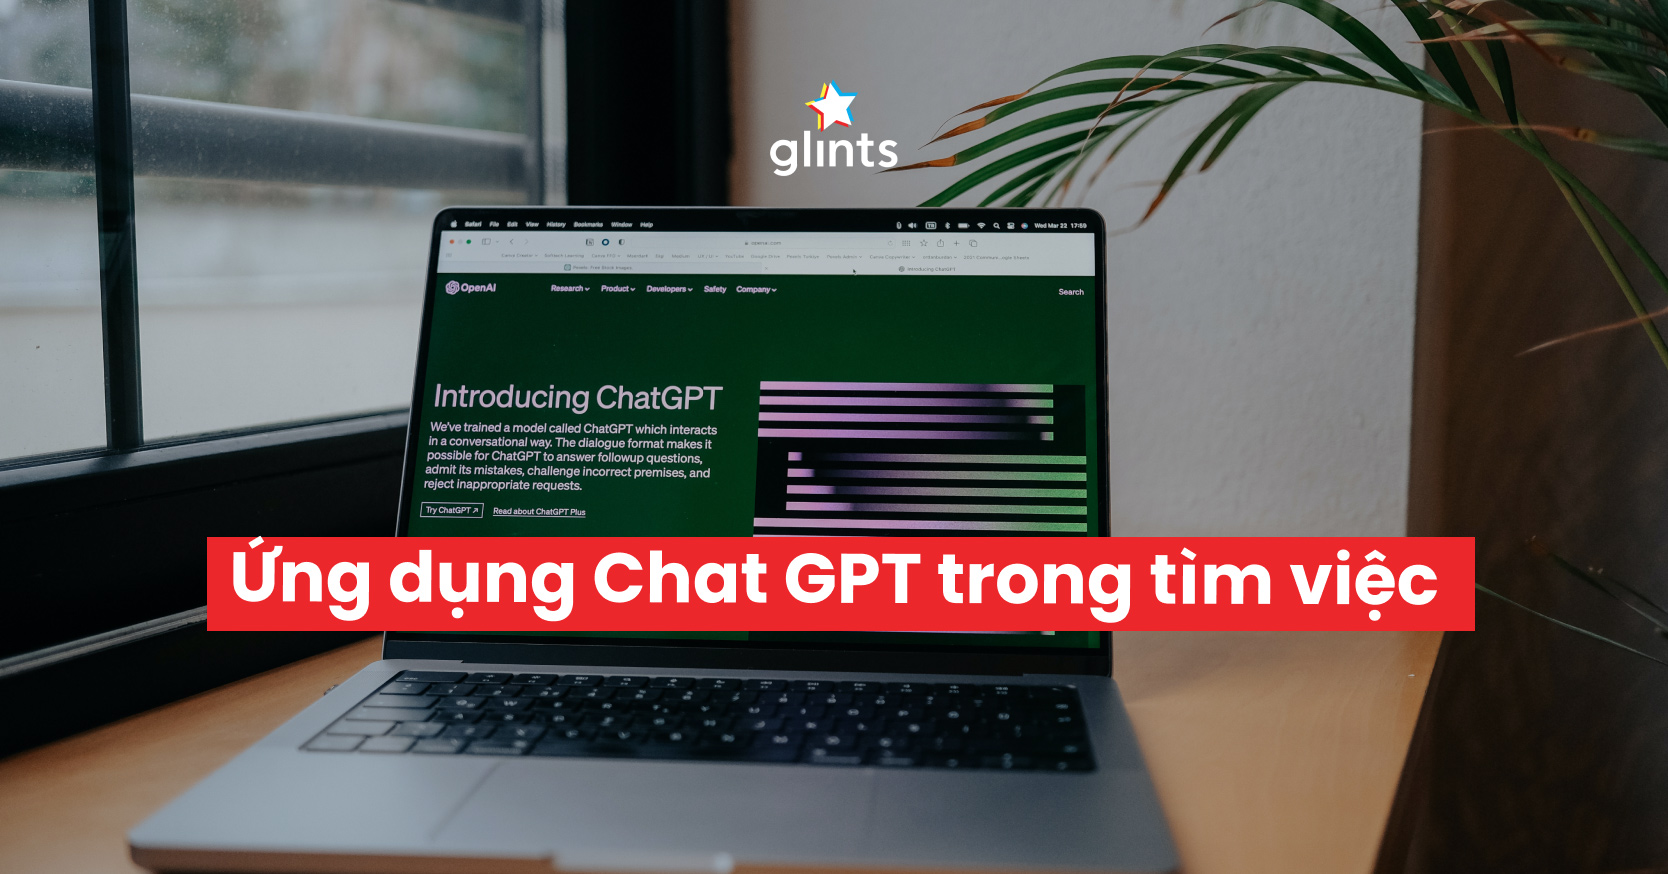 ung-dung-chat-gpt-vao-tim-viec